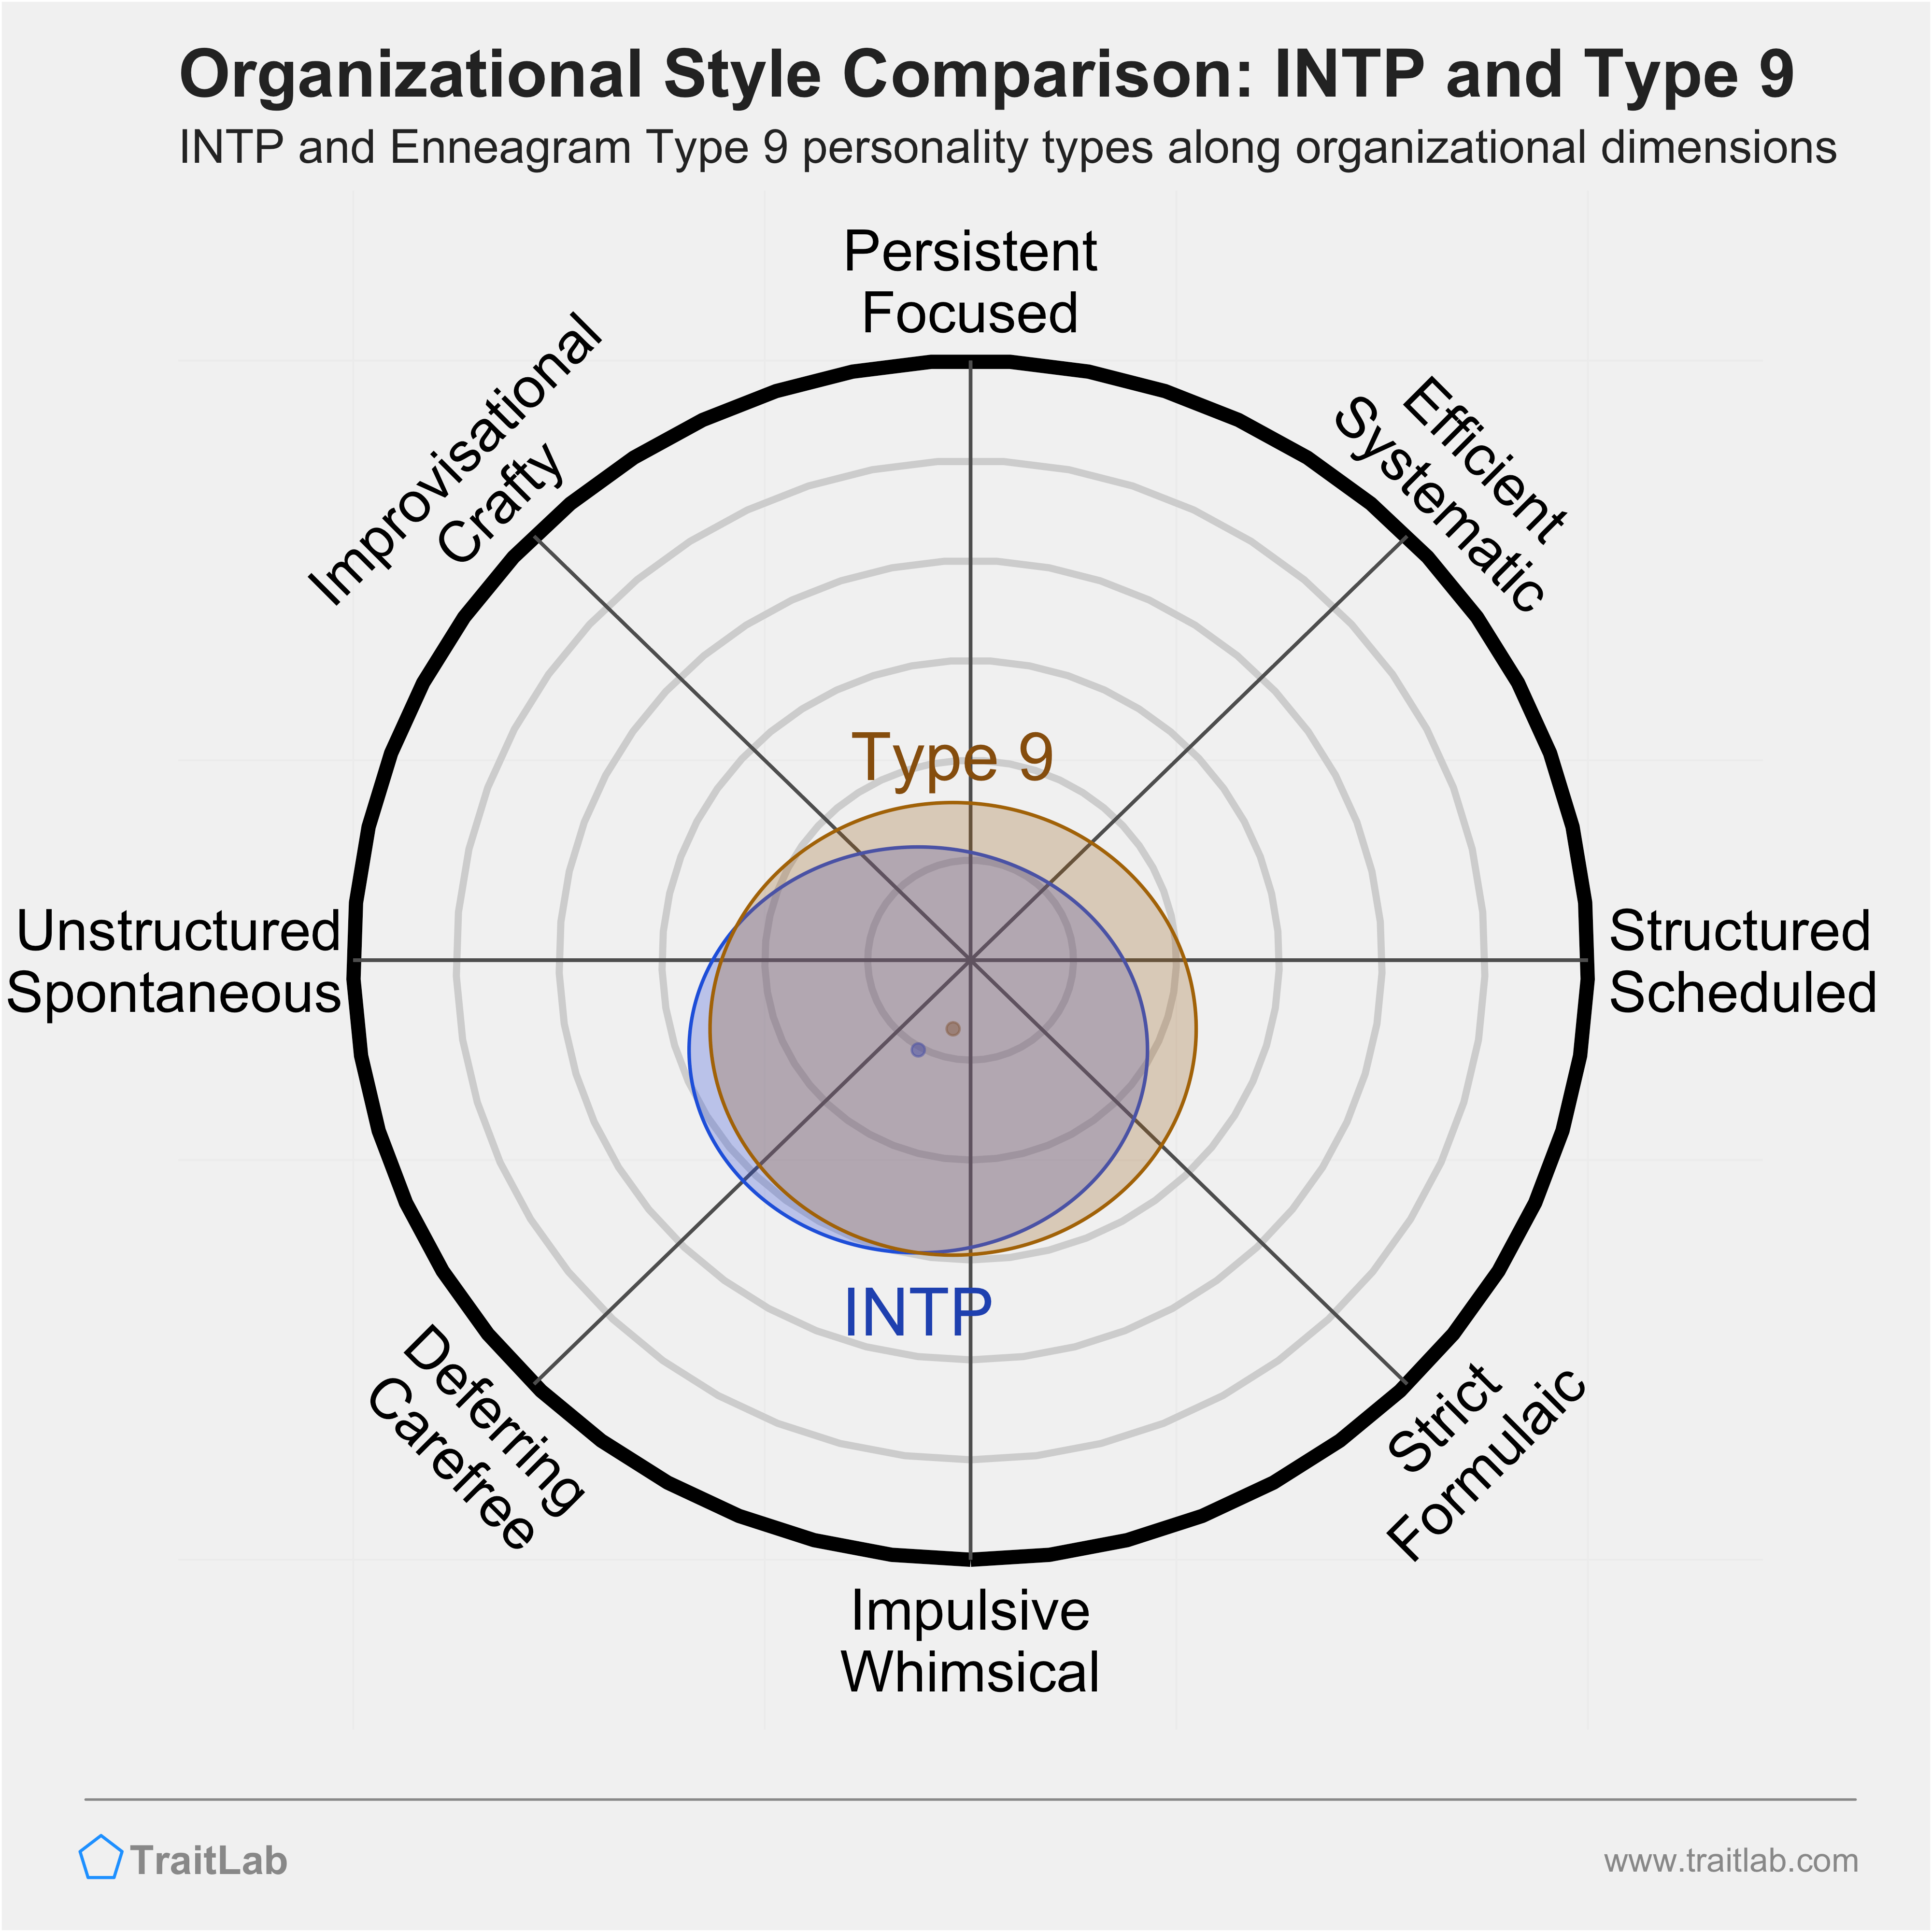 INTP and Type 9 comparison across organizational dimensions